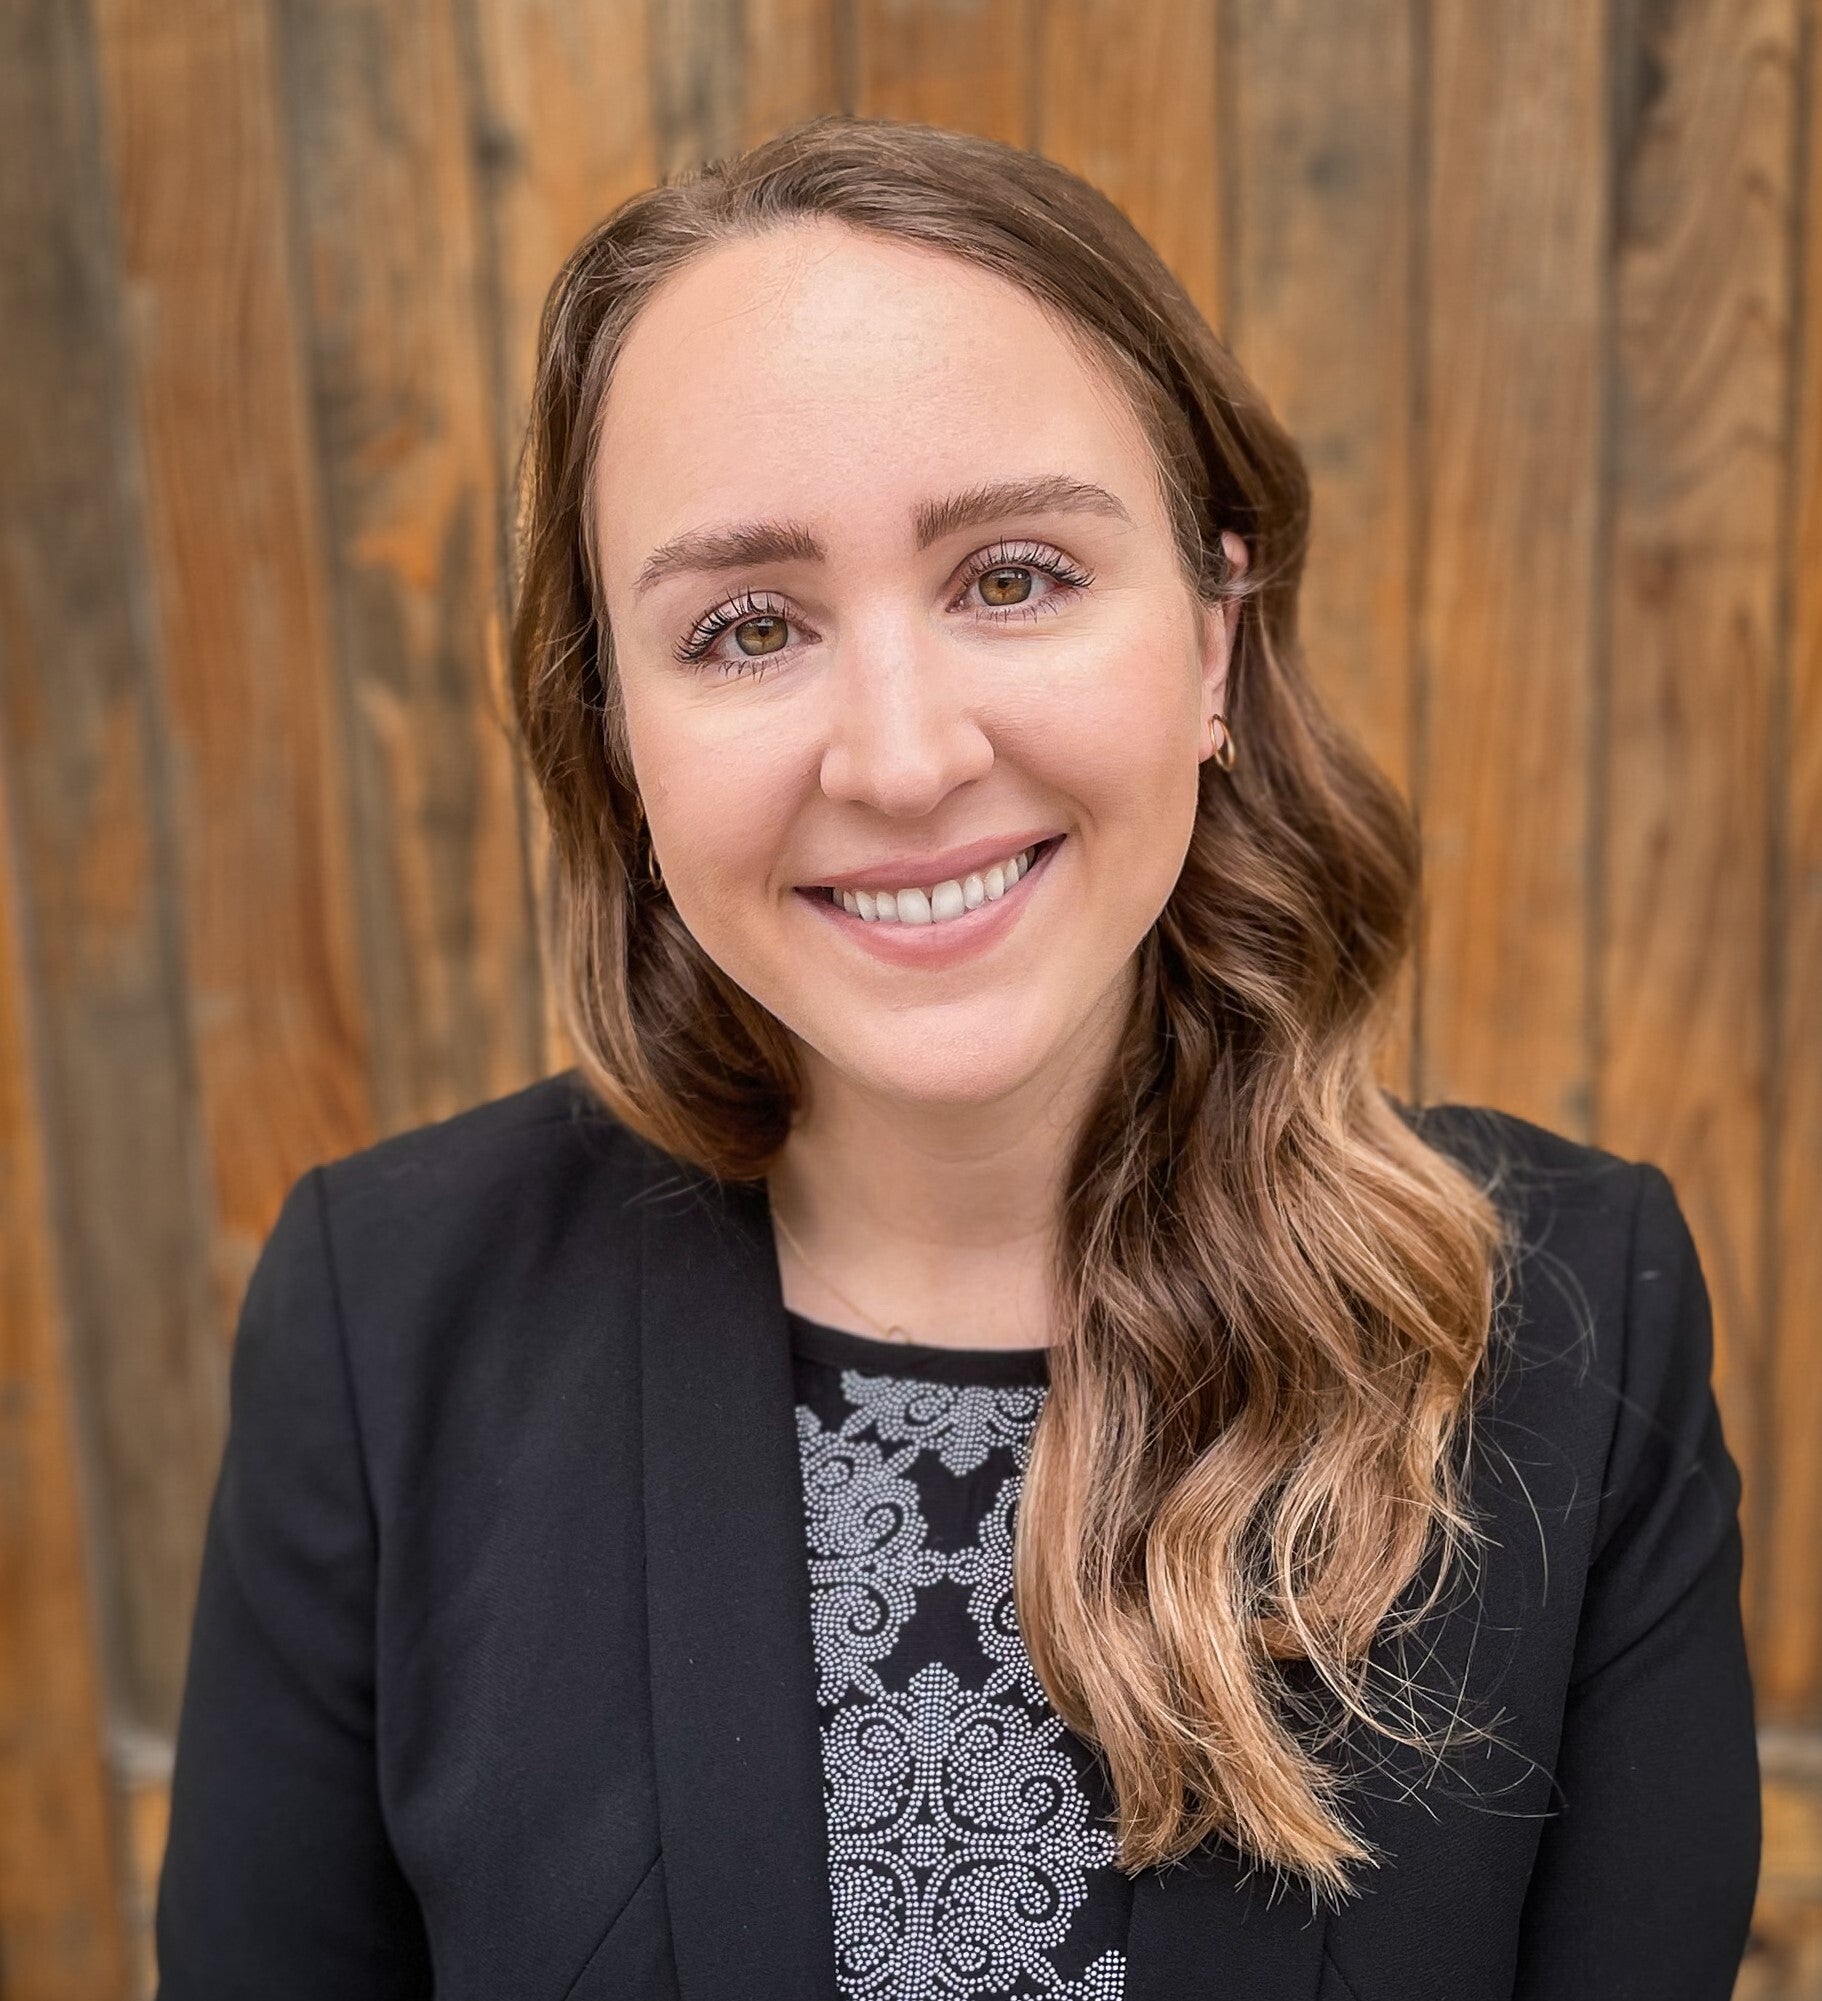 Jessica R. Meeker, MPH, is a third-year doctoral candidate in Epidemiology at the University of Pennsylvania Perelman School Of Medicine where she focuses on the impact of neighborhood-level environmental exposures on maternal health disparities. (Photograph courtesy of Penn Medicine)